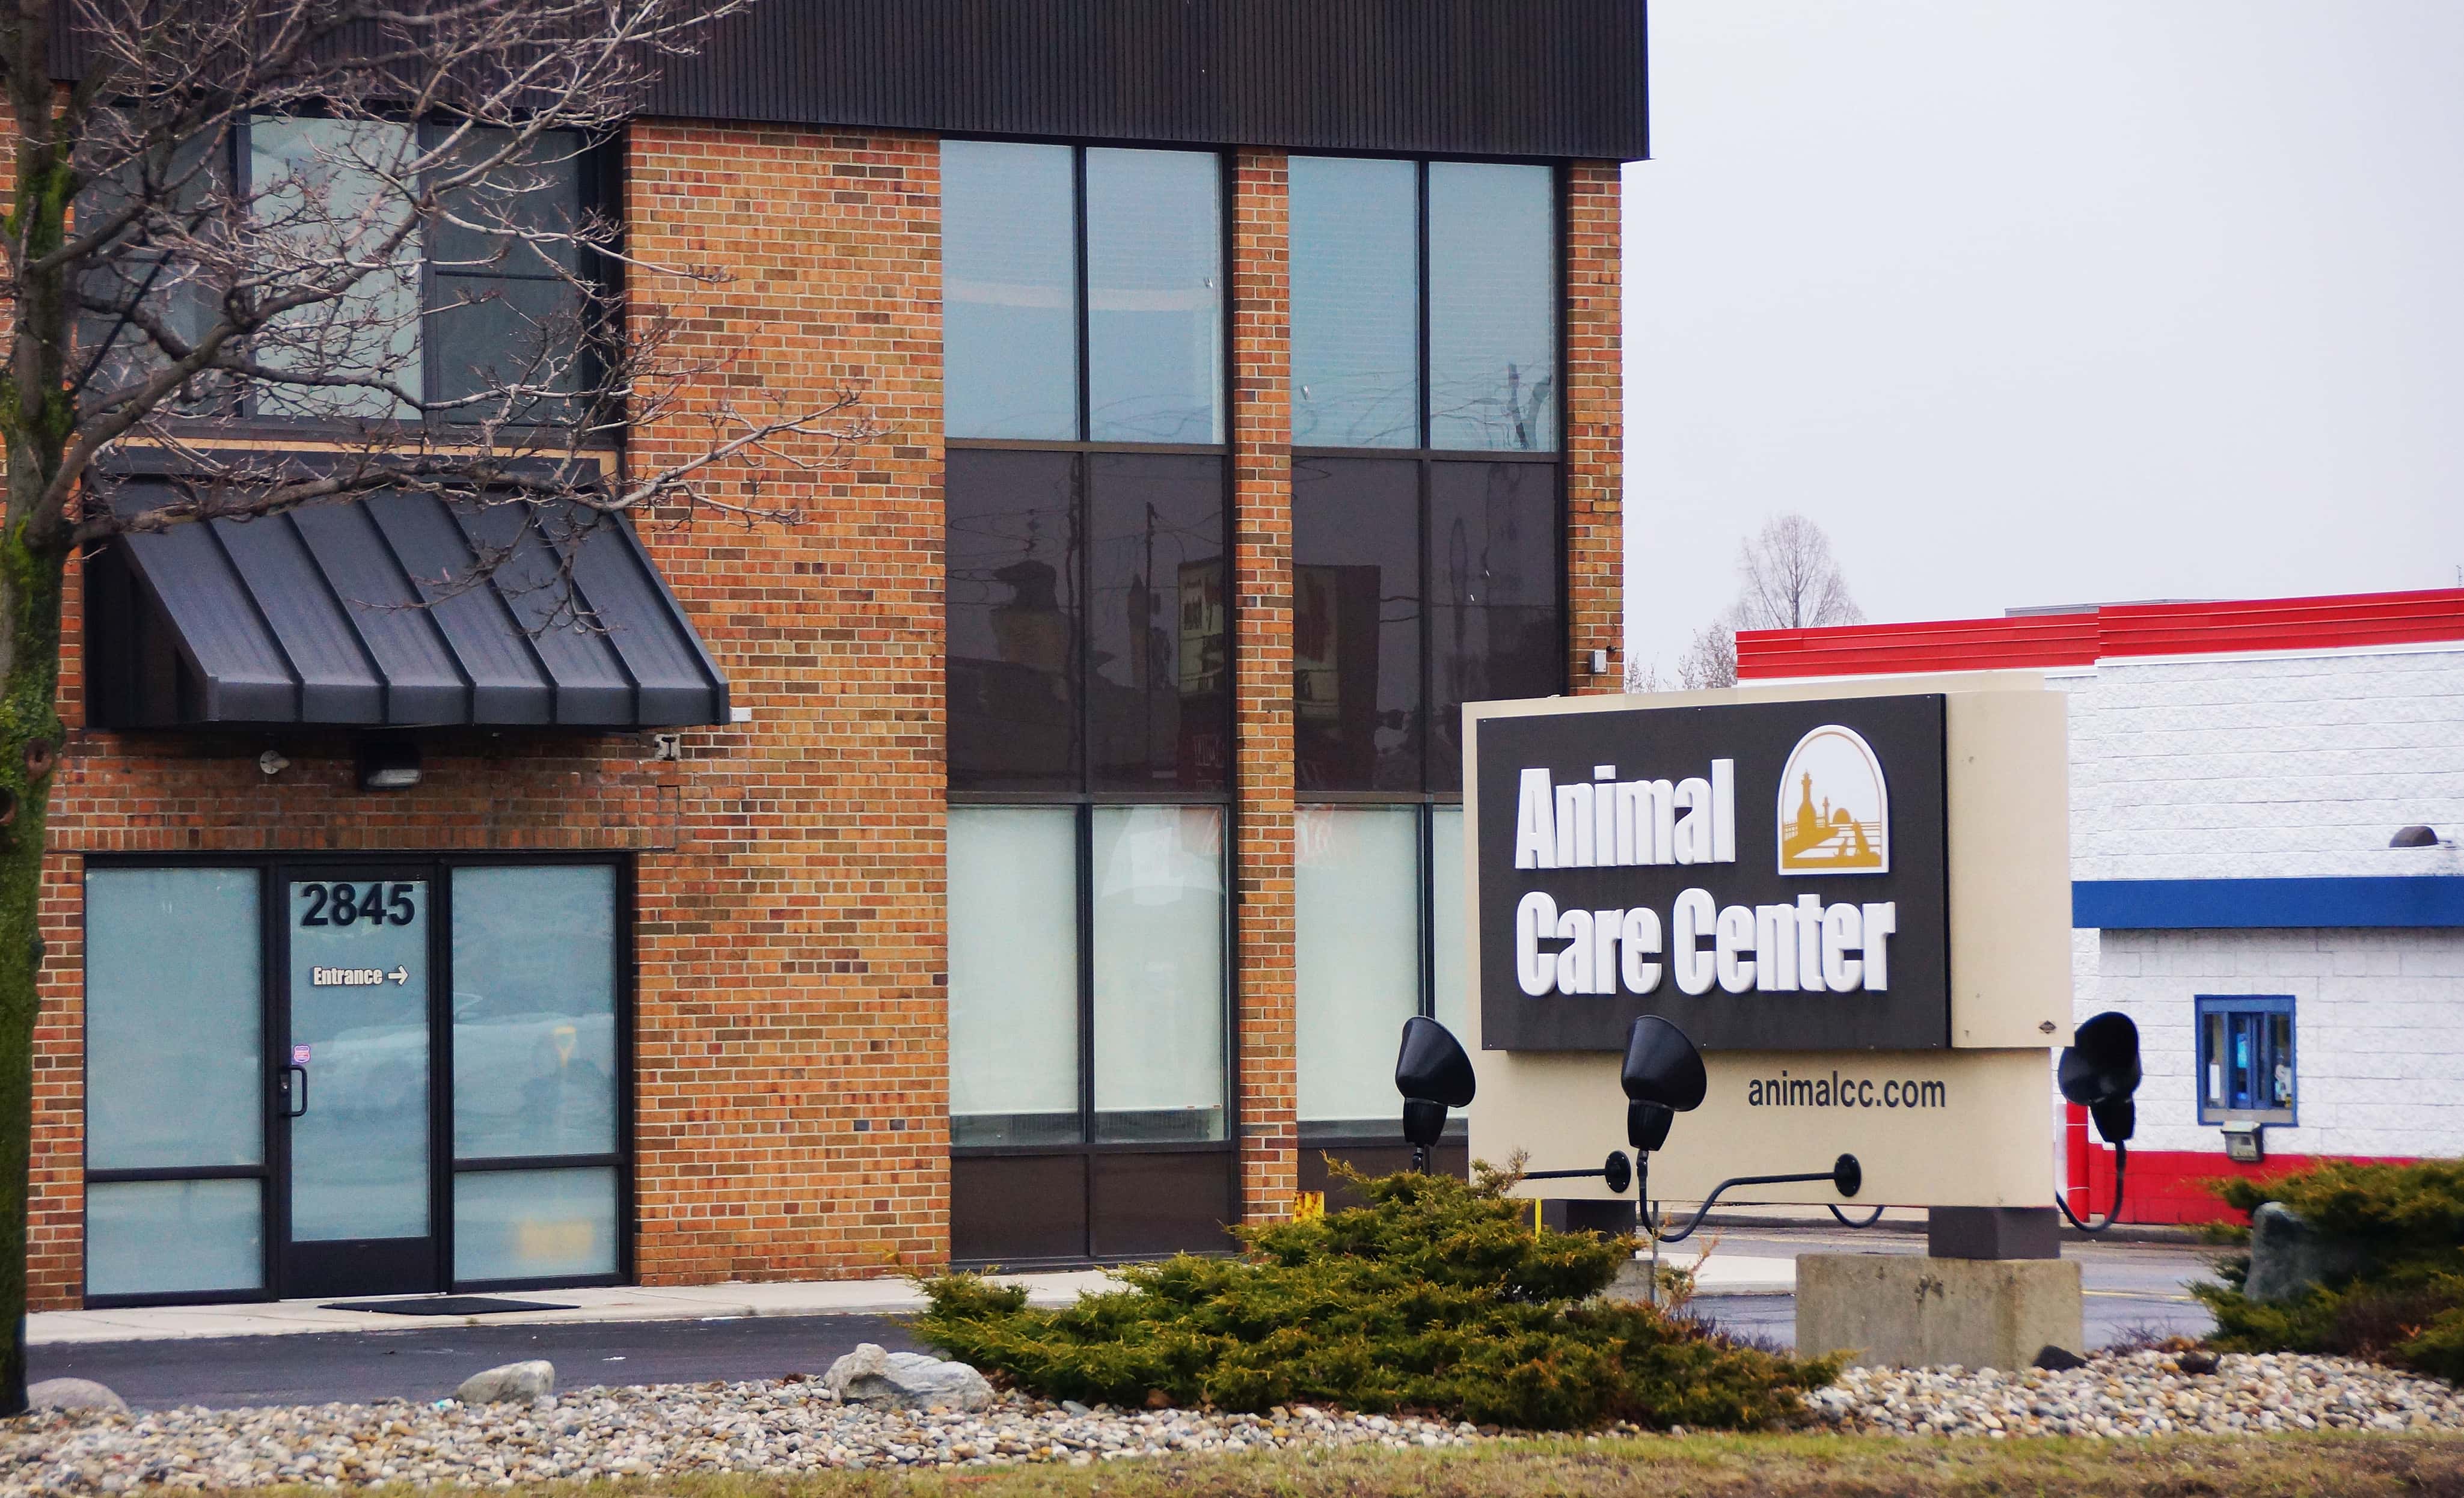 Animal Care Center Announces Abrupt Decision to Cease Operations in St. Joe  | Moody on the Market